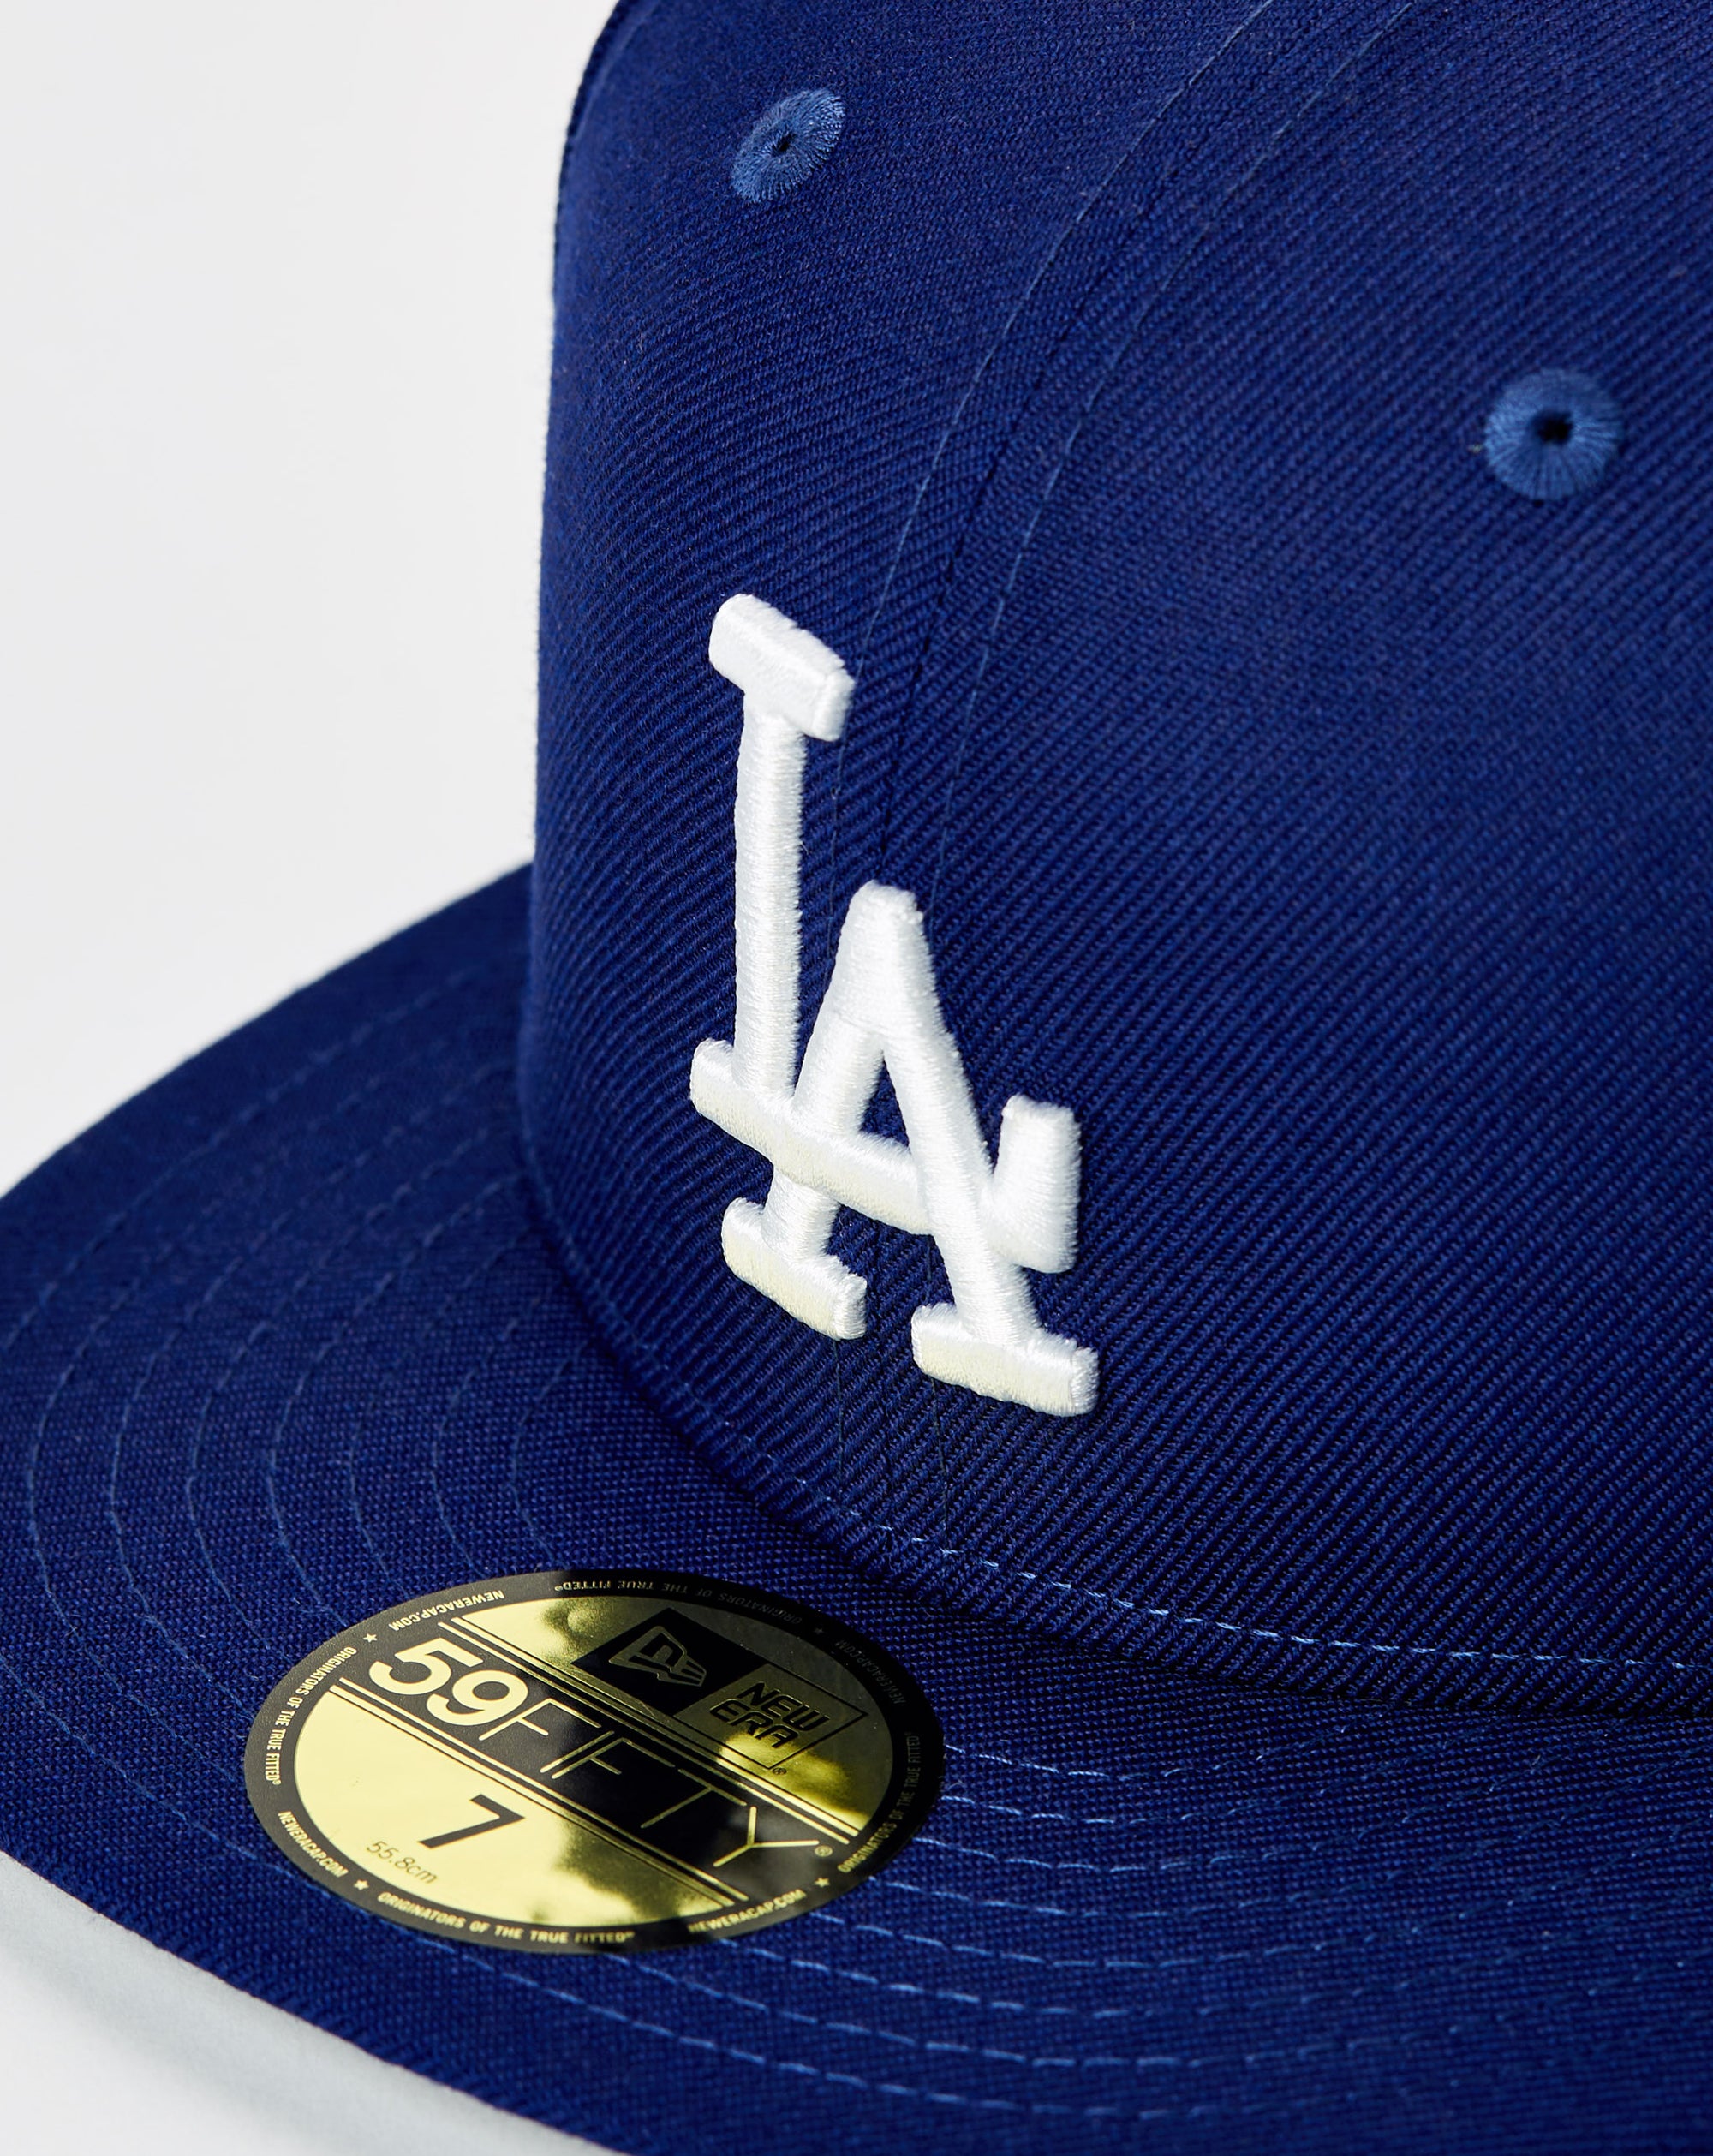 New Era MLB 59FIFTY Americana Patch Collection Dodgers Fitted Cap